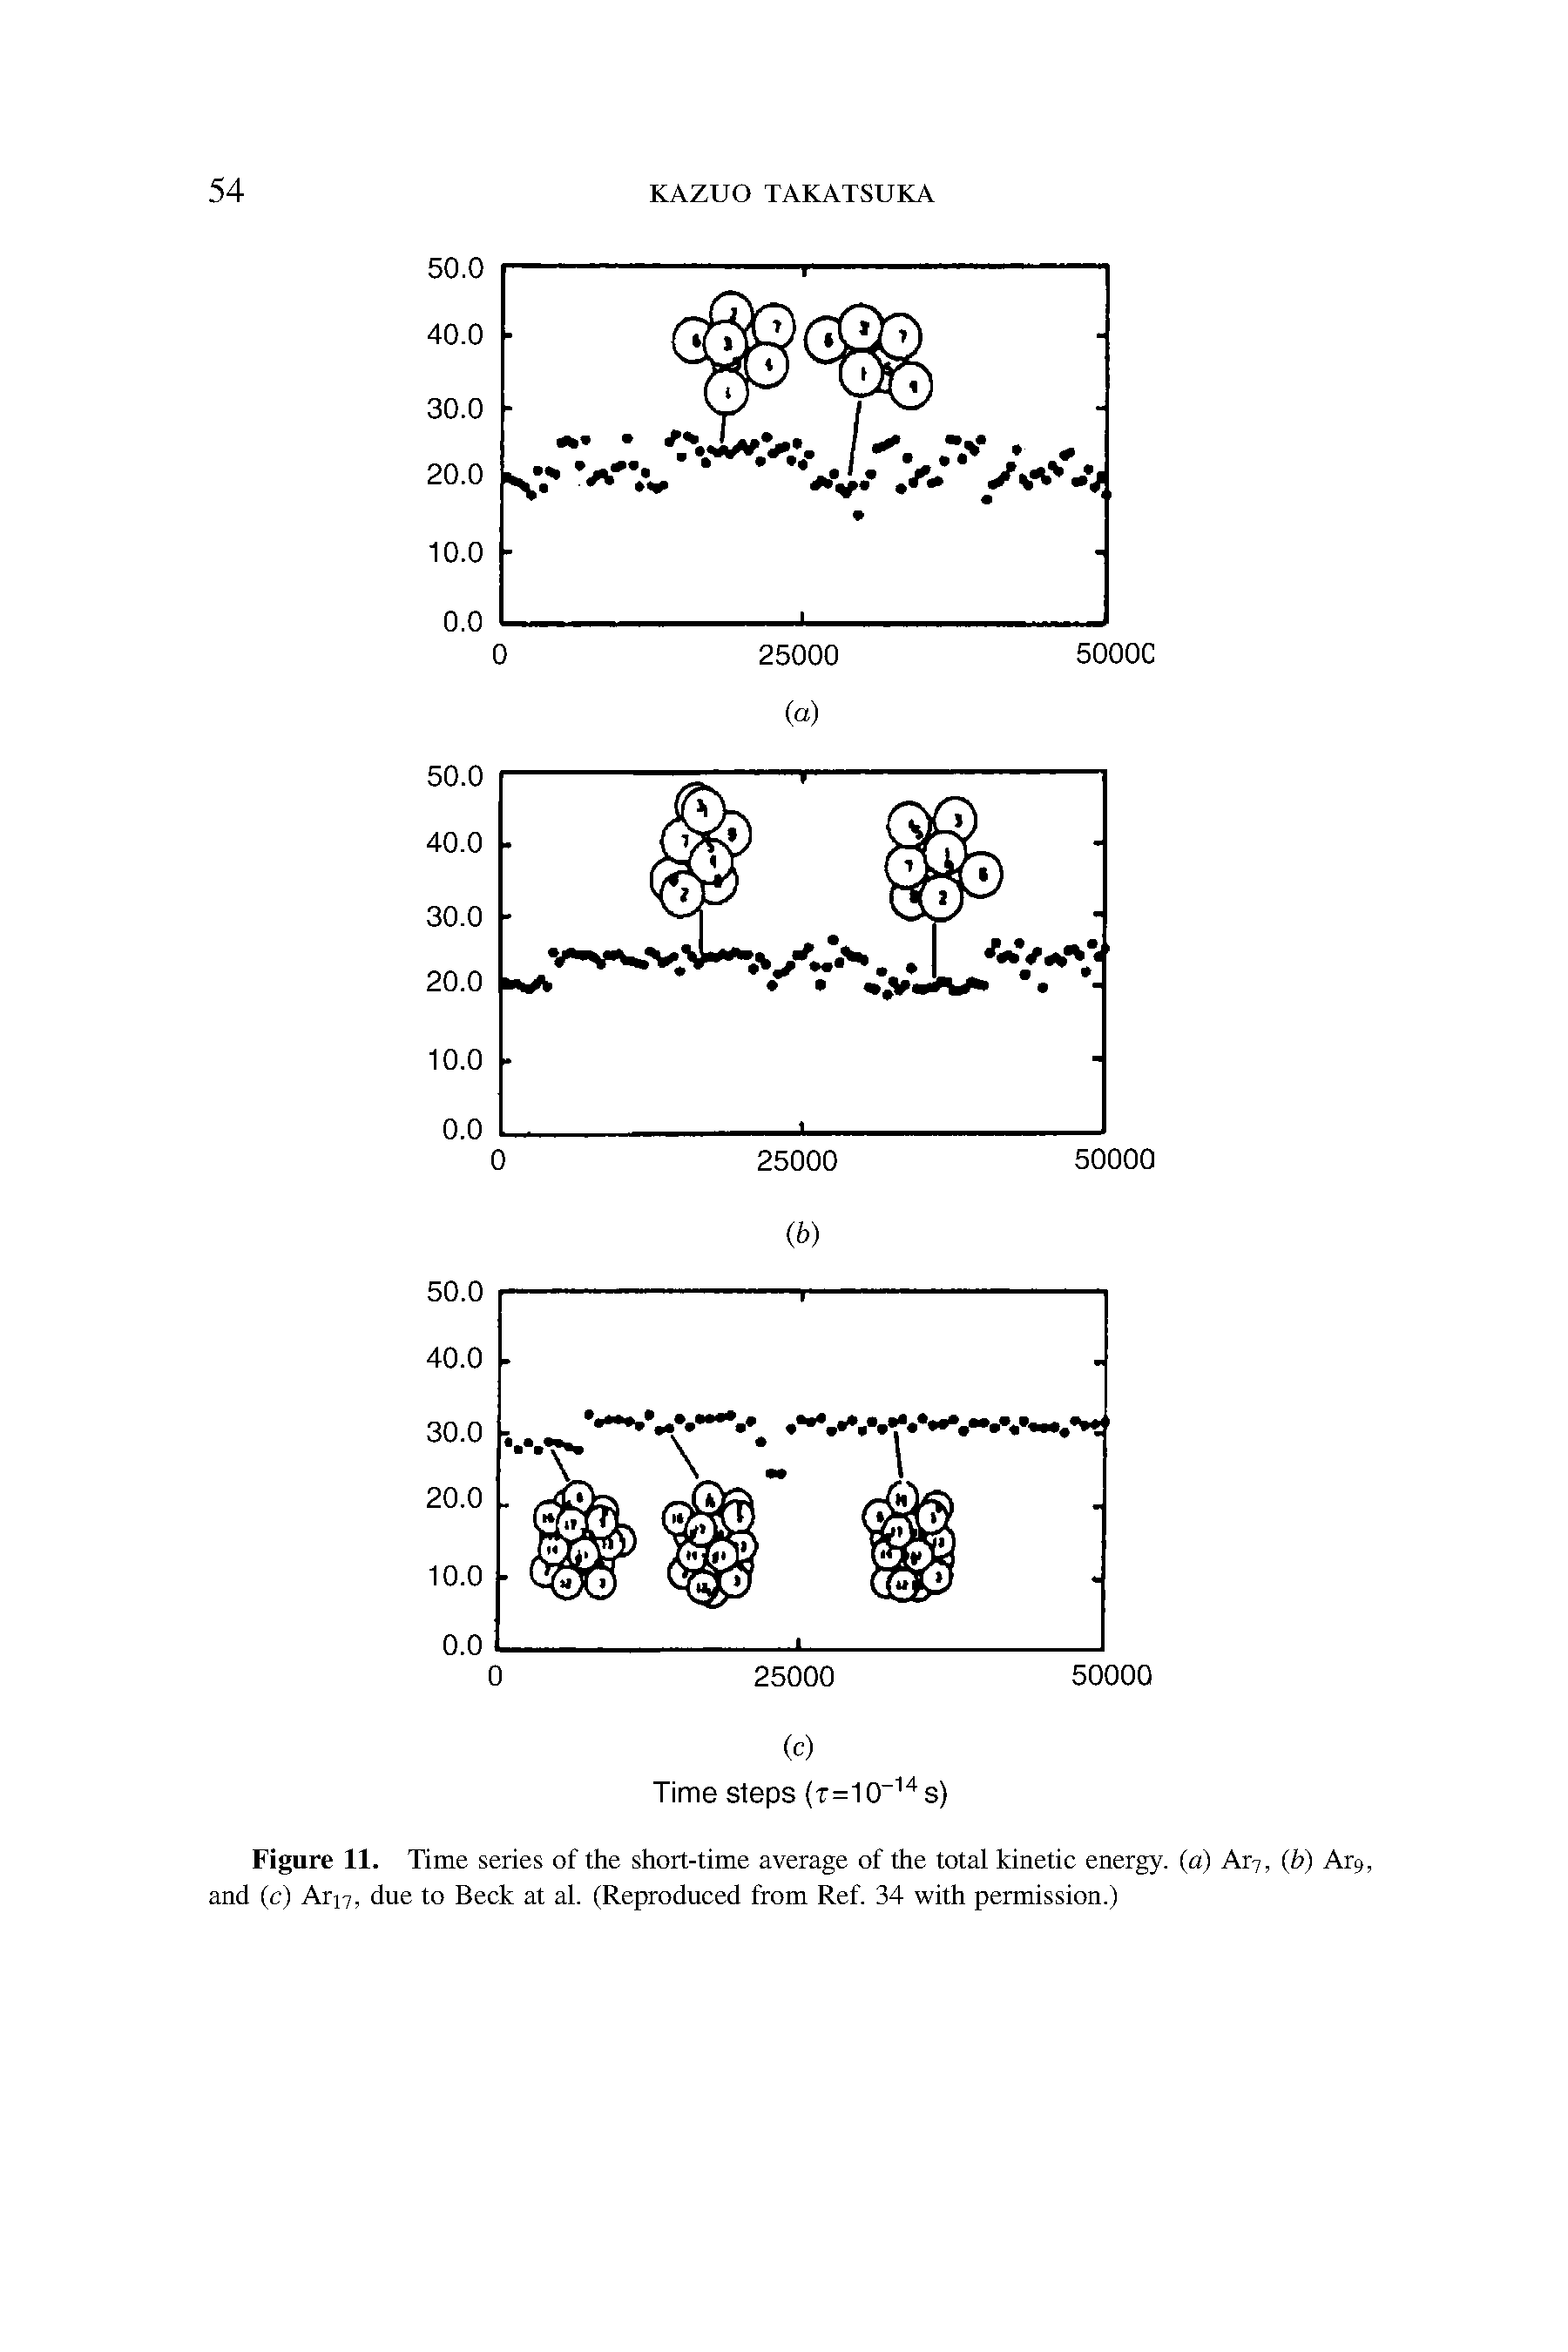 Figure 11. Time series of the short-time average of the total kinetic energy, (a) Ar7, (b) Ar, and (c) Arn, due to Beck at al. (Reproduced from Ref. 34 with permission.)...